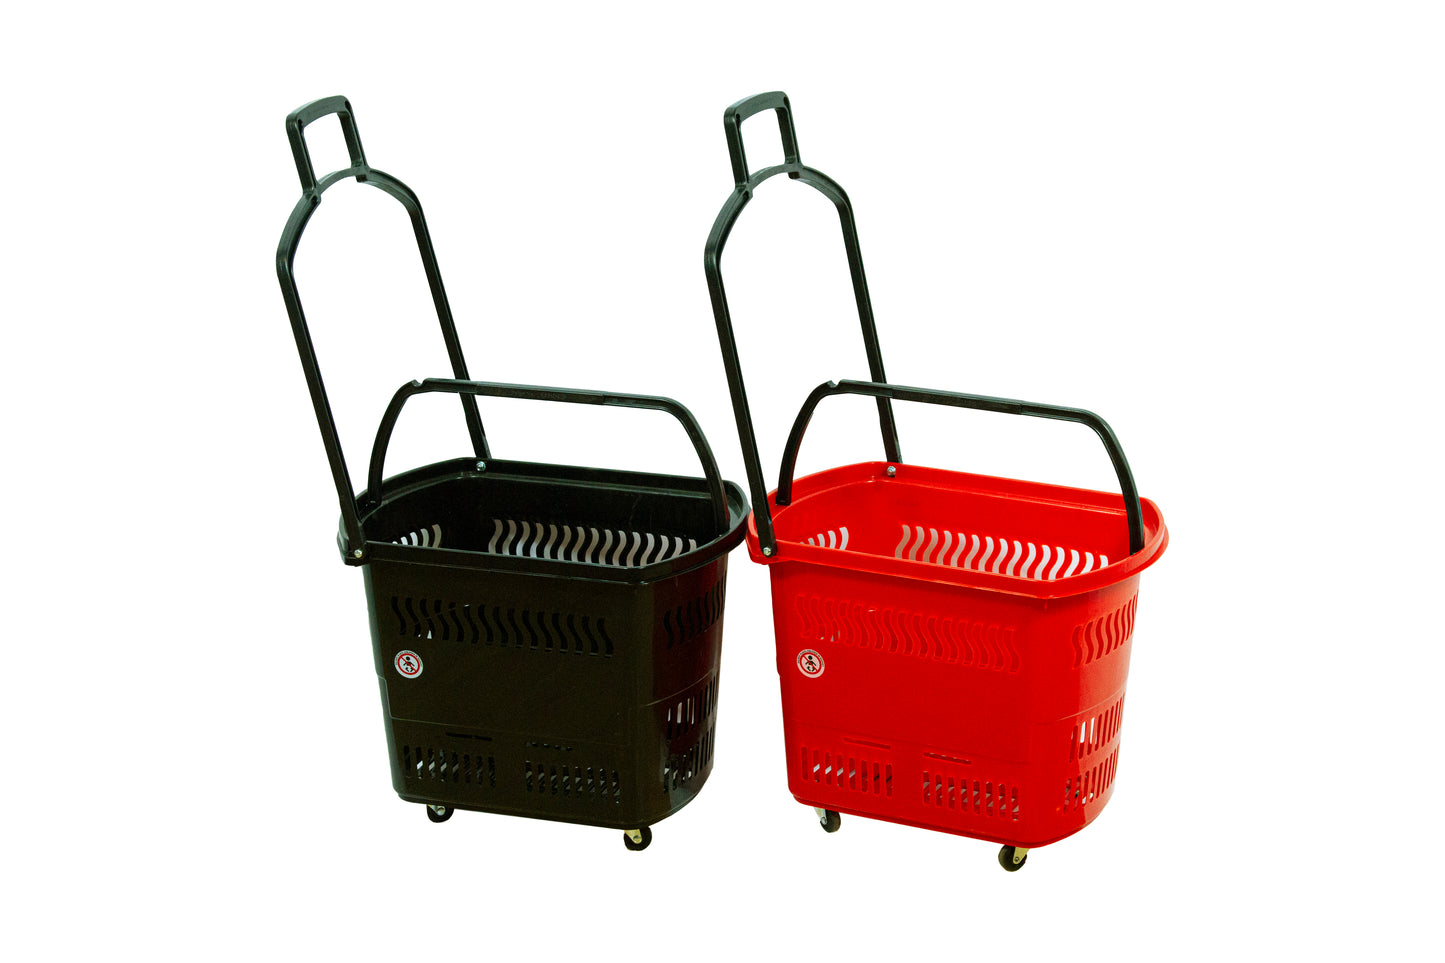 Shopping basket for retail store on wheels 4727 - Mobico - Mobico inc.